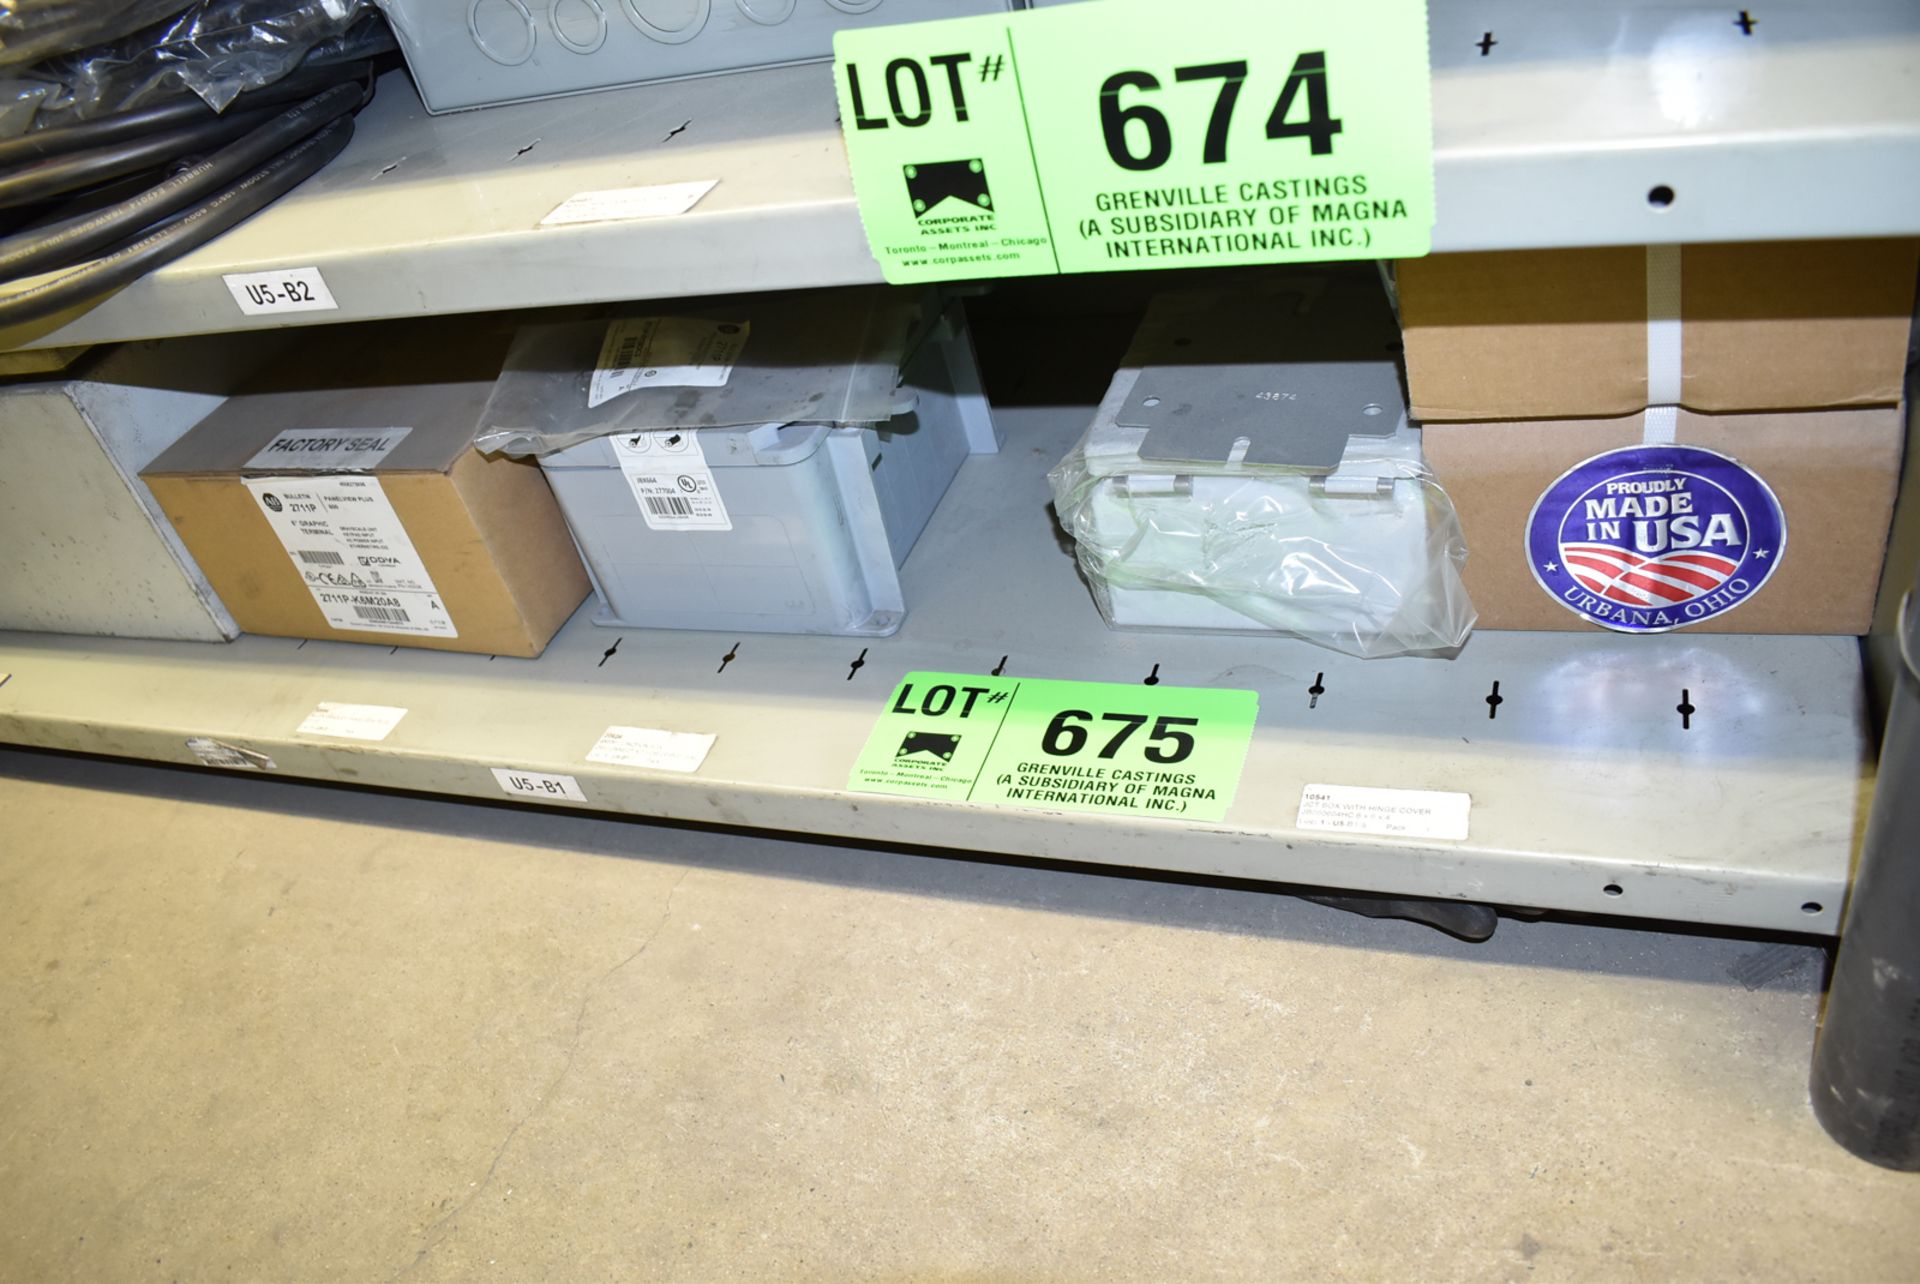 LOT/ CONTENTS OF SHELF INCLUDING ALLEN-BRADLEY PANELVIEW CONTROL, ELECTRICAL BOXES, SPARE COMPONENTS